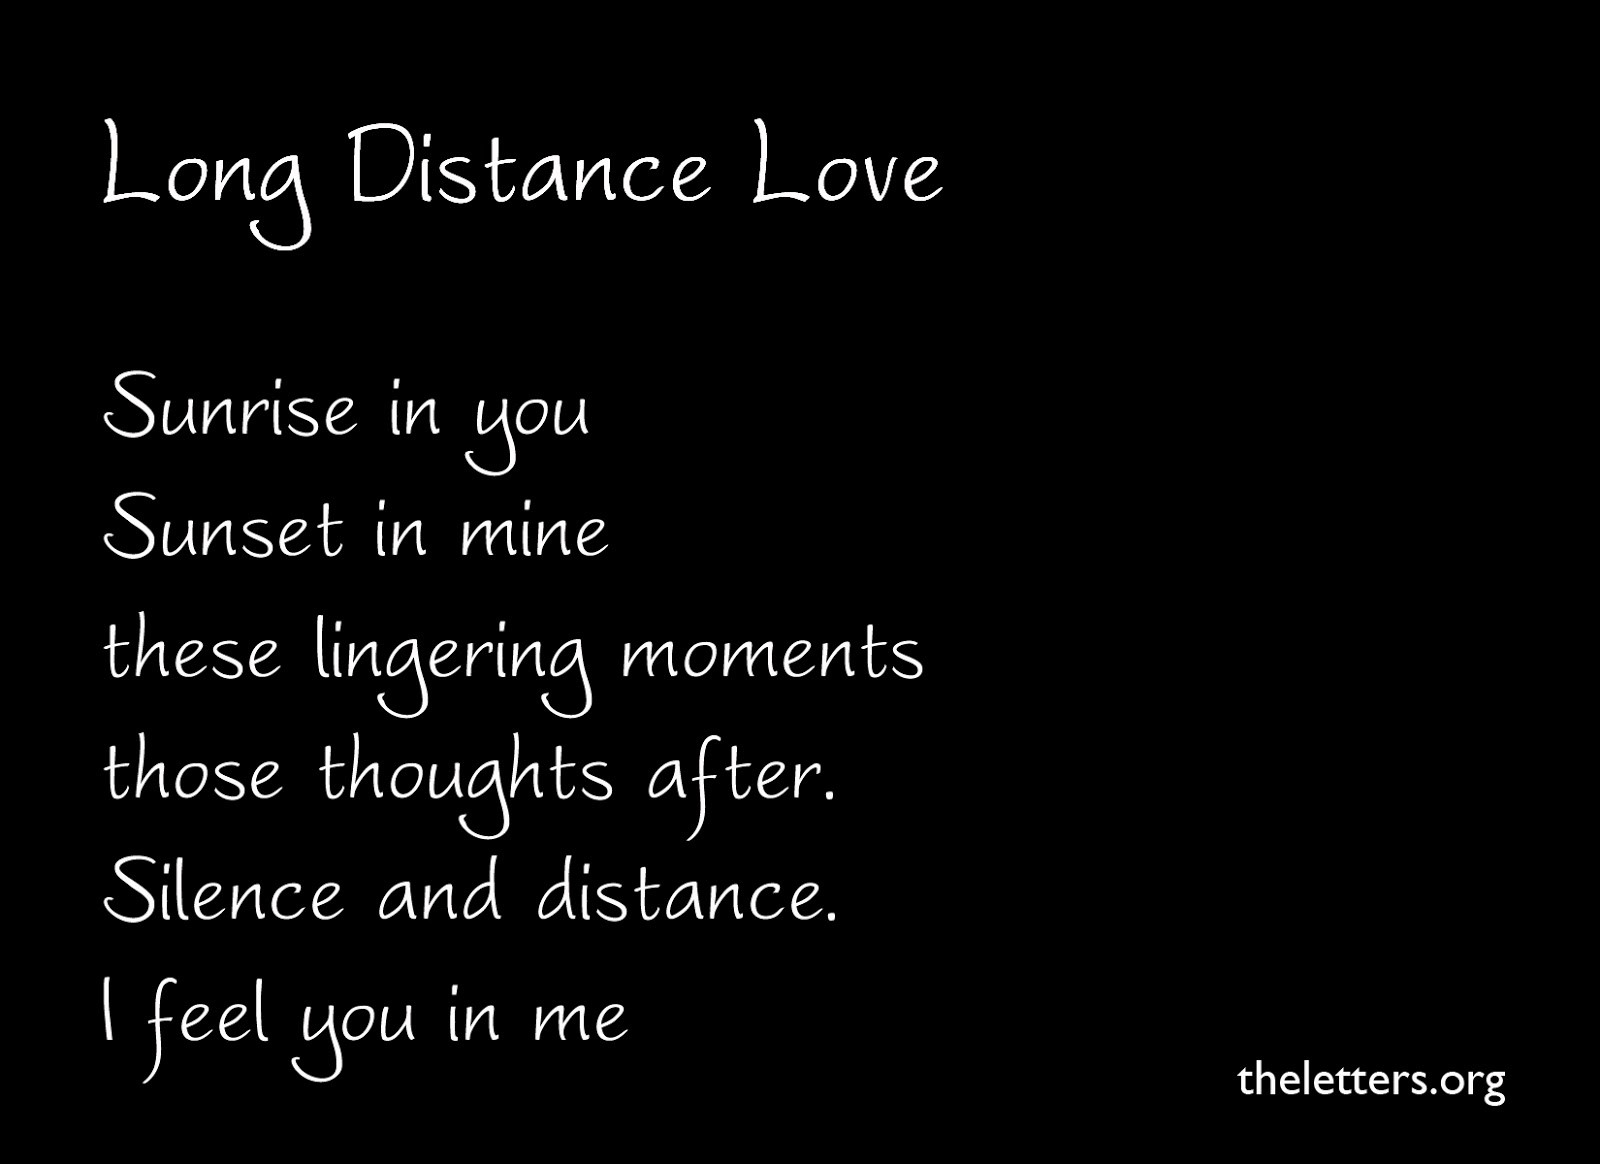 Long Distance Relationship Quotes For Her
 Funny Long Distance Relationship Quotes QuotesGram